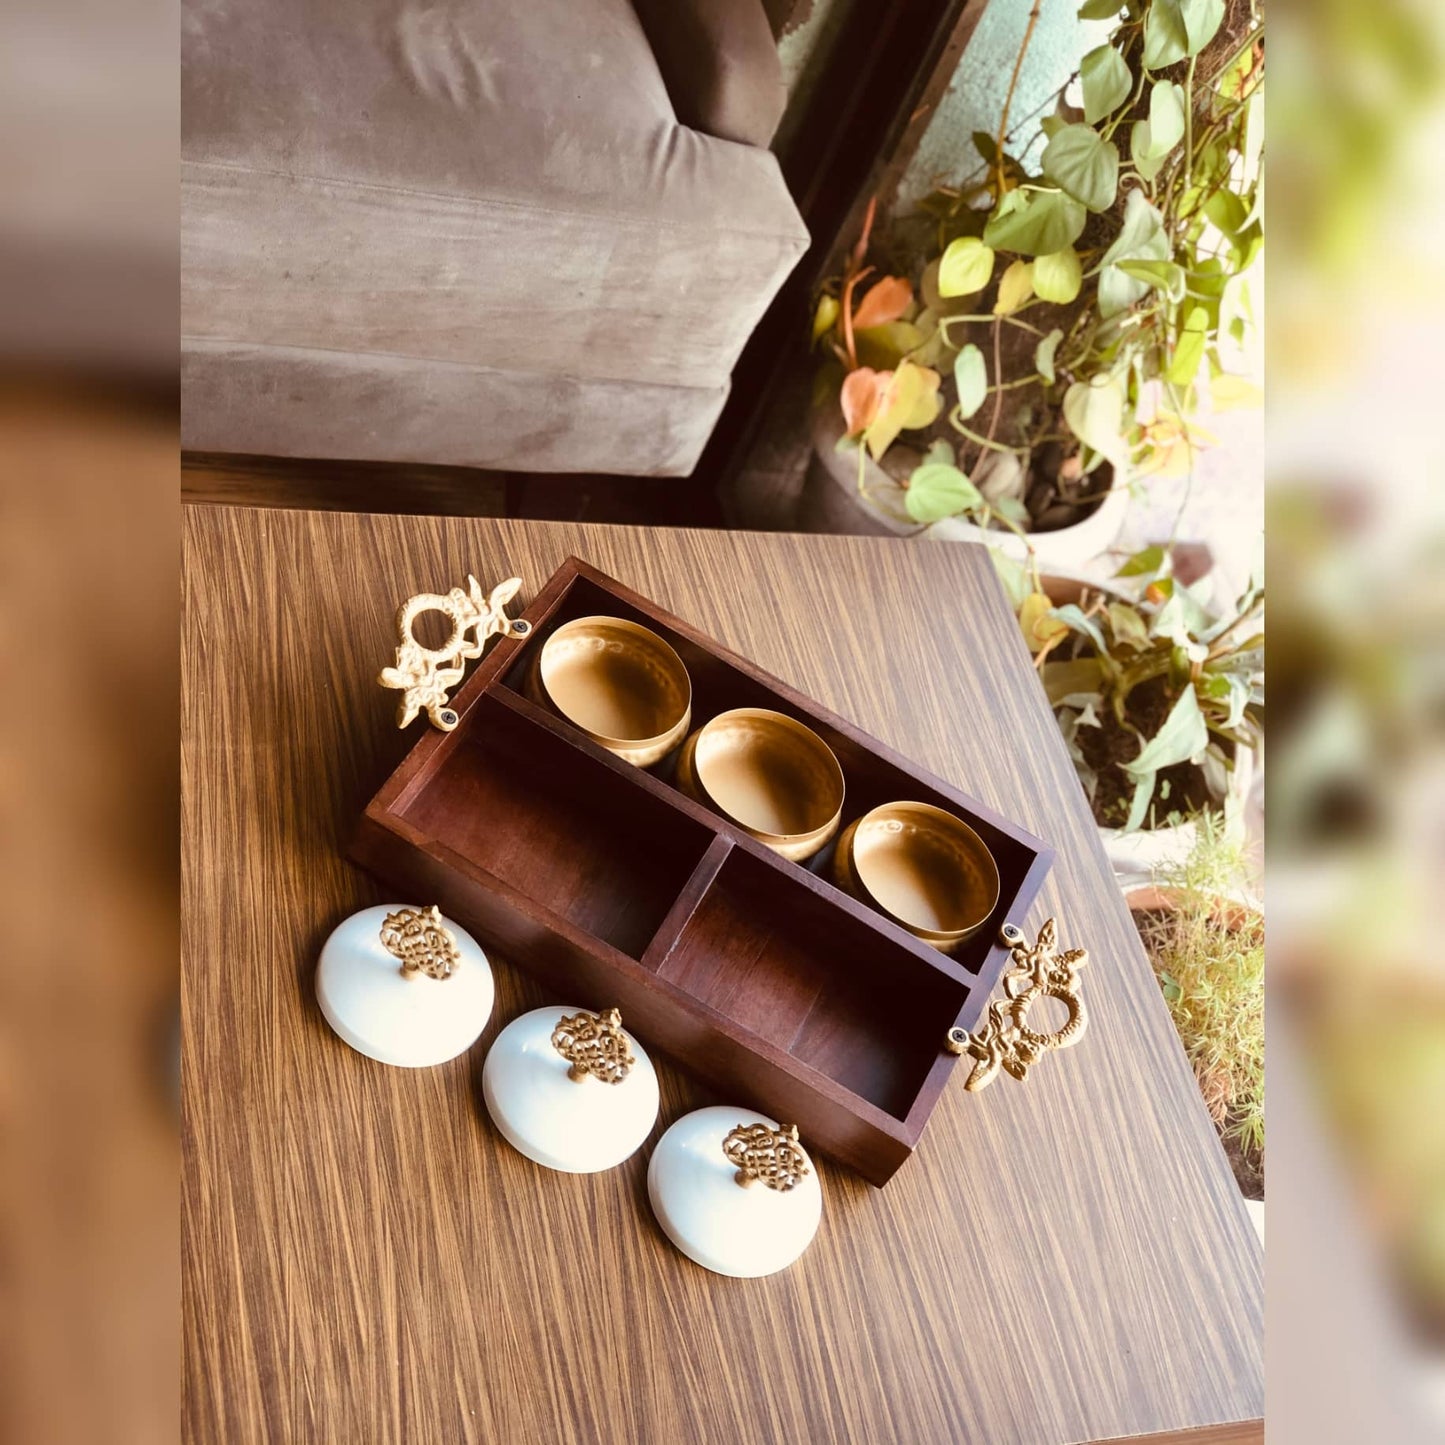 Humsafar Wooden Tray | DryFruit Tray | 1(One) Wooden Serving Tray and 3 Jar Inluded Dusky Lory